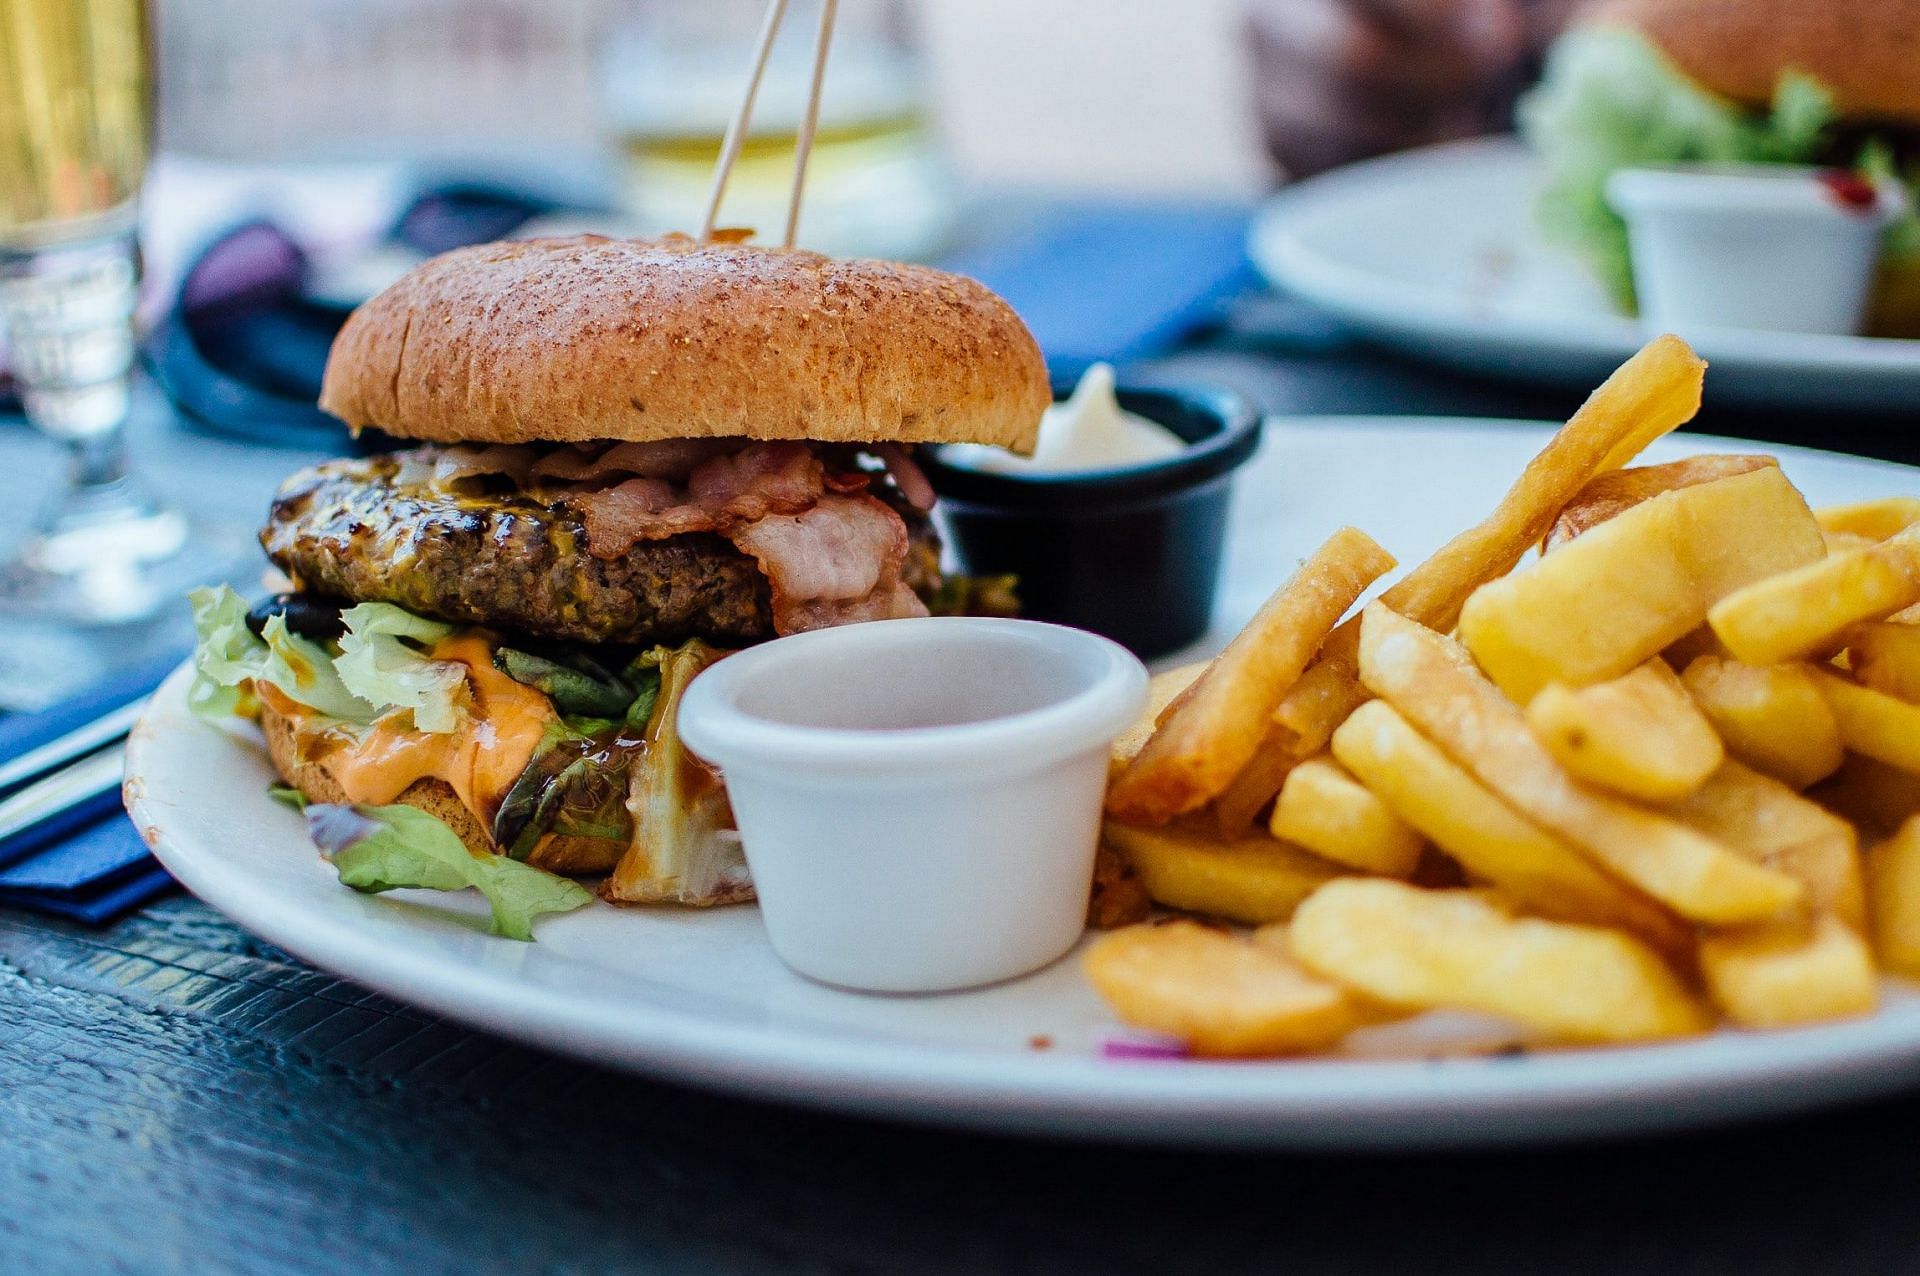 Processed foods are discouraged in this diet. (Image via Unsplash/Robin Stickel)